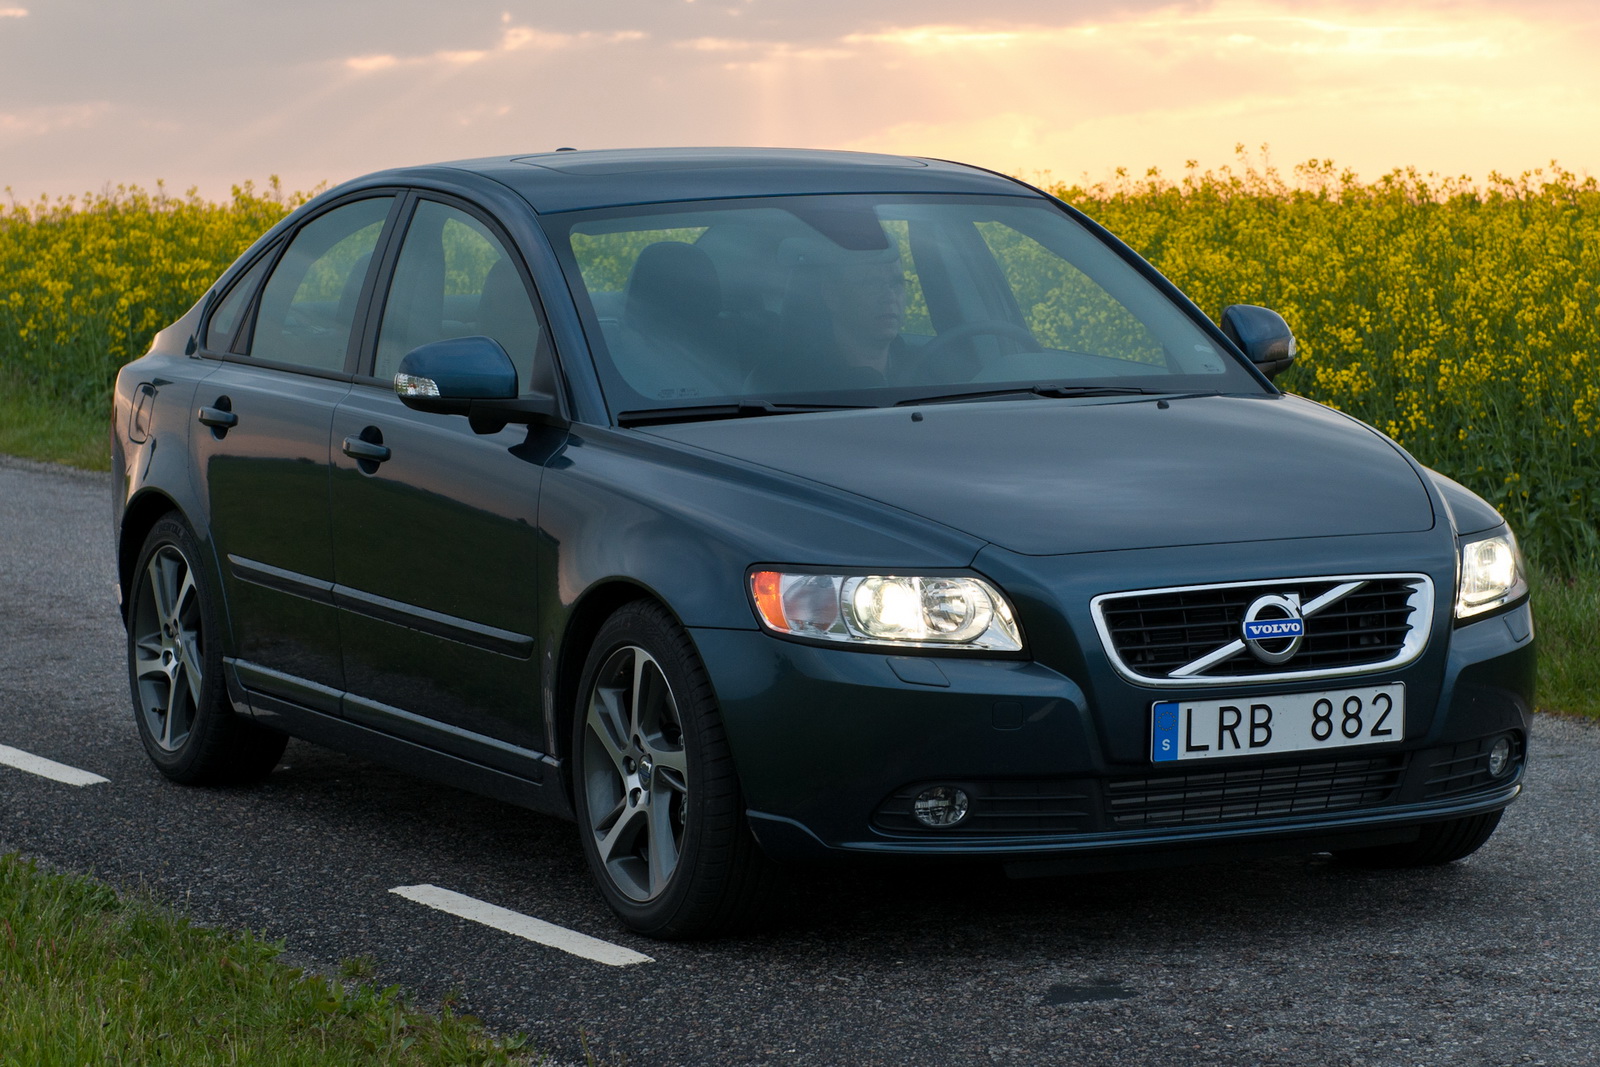 Volvo to Axe S40/V50 duo from US Lineup Due to Poor Sales